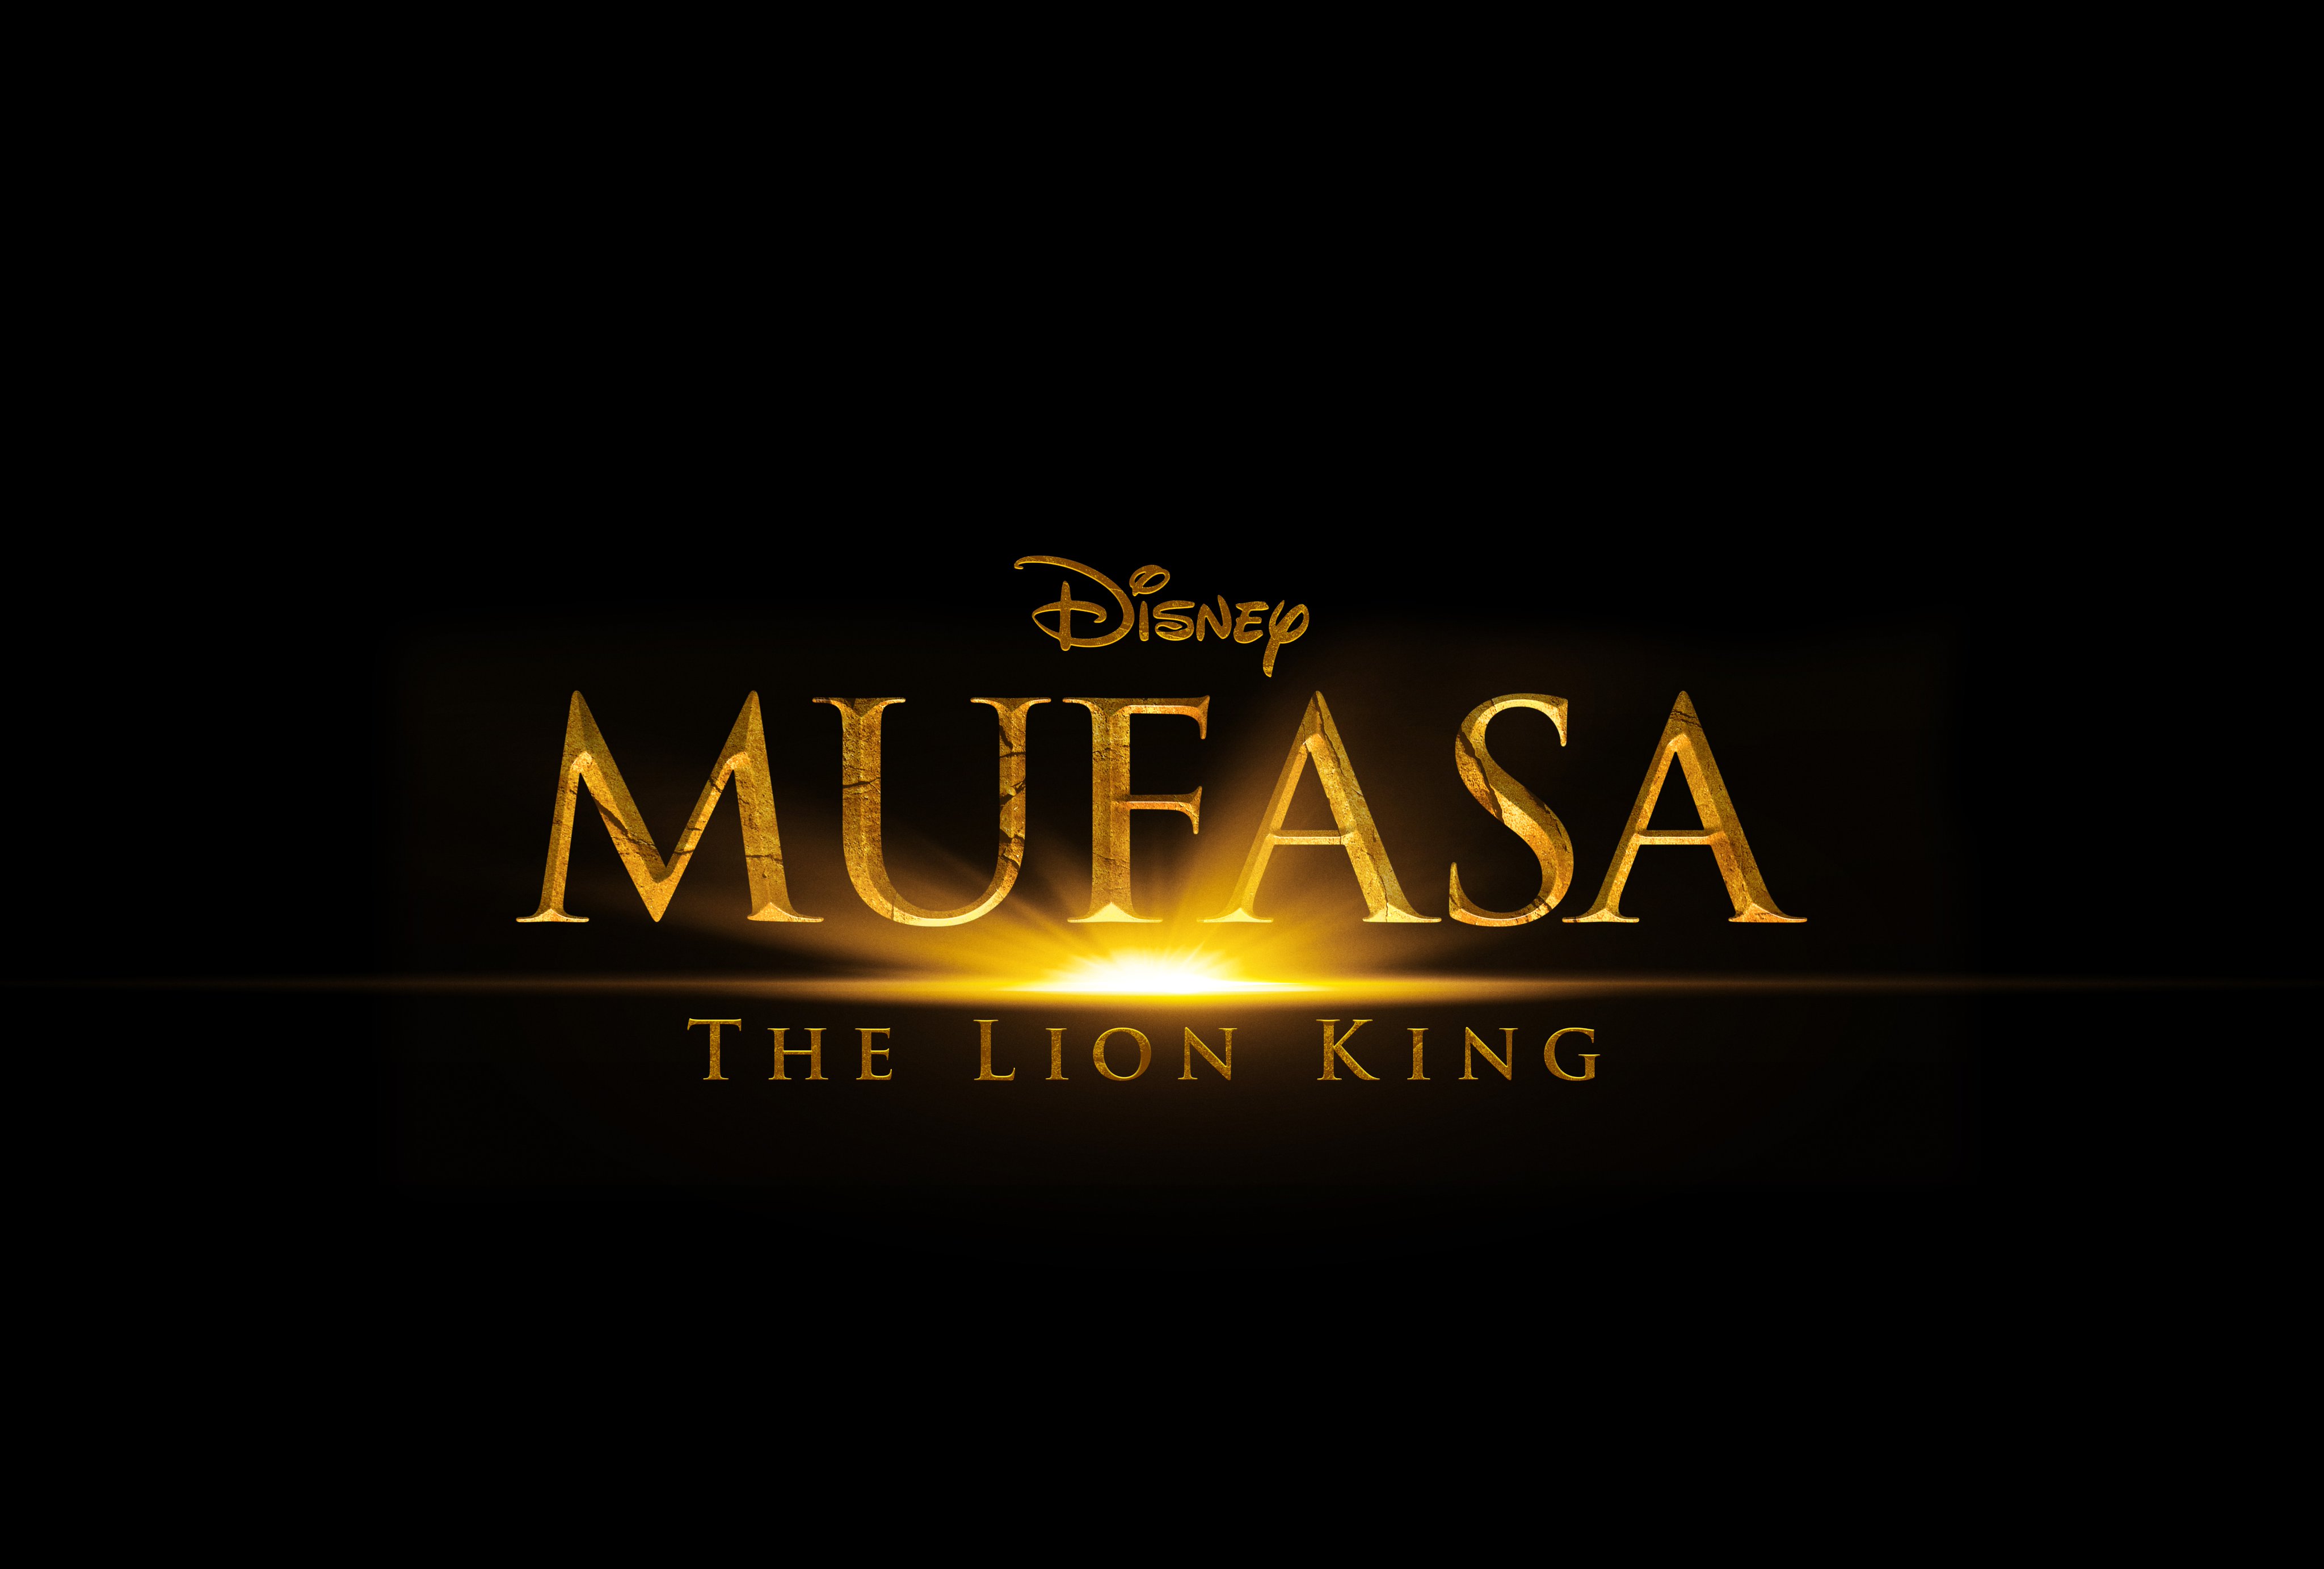 Disney Mufasa The Lion King movie 2024 news story cast posters pictures trailer 